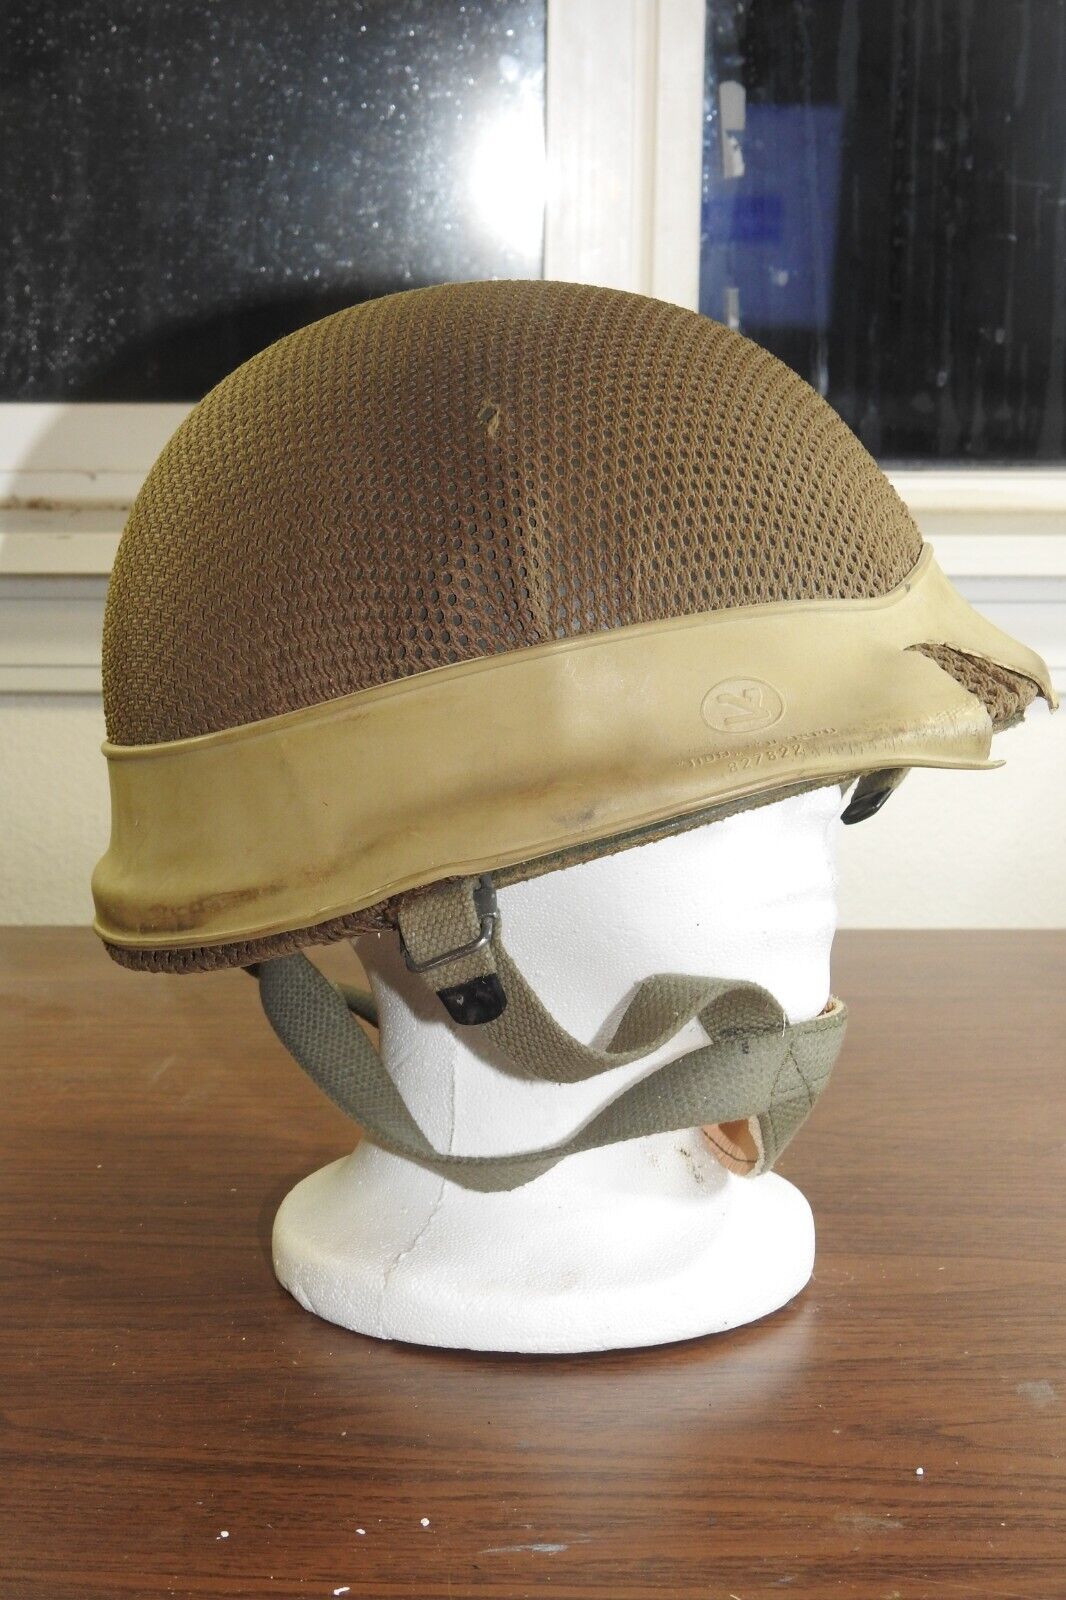 Israeli Defense Forces Helmet and Liner Very Nice IDF Israel Rare Collectible